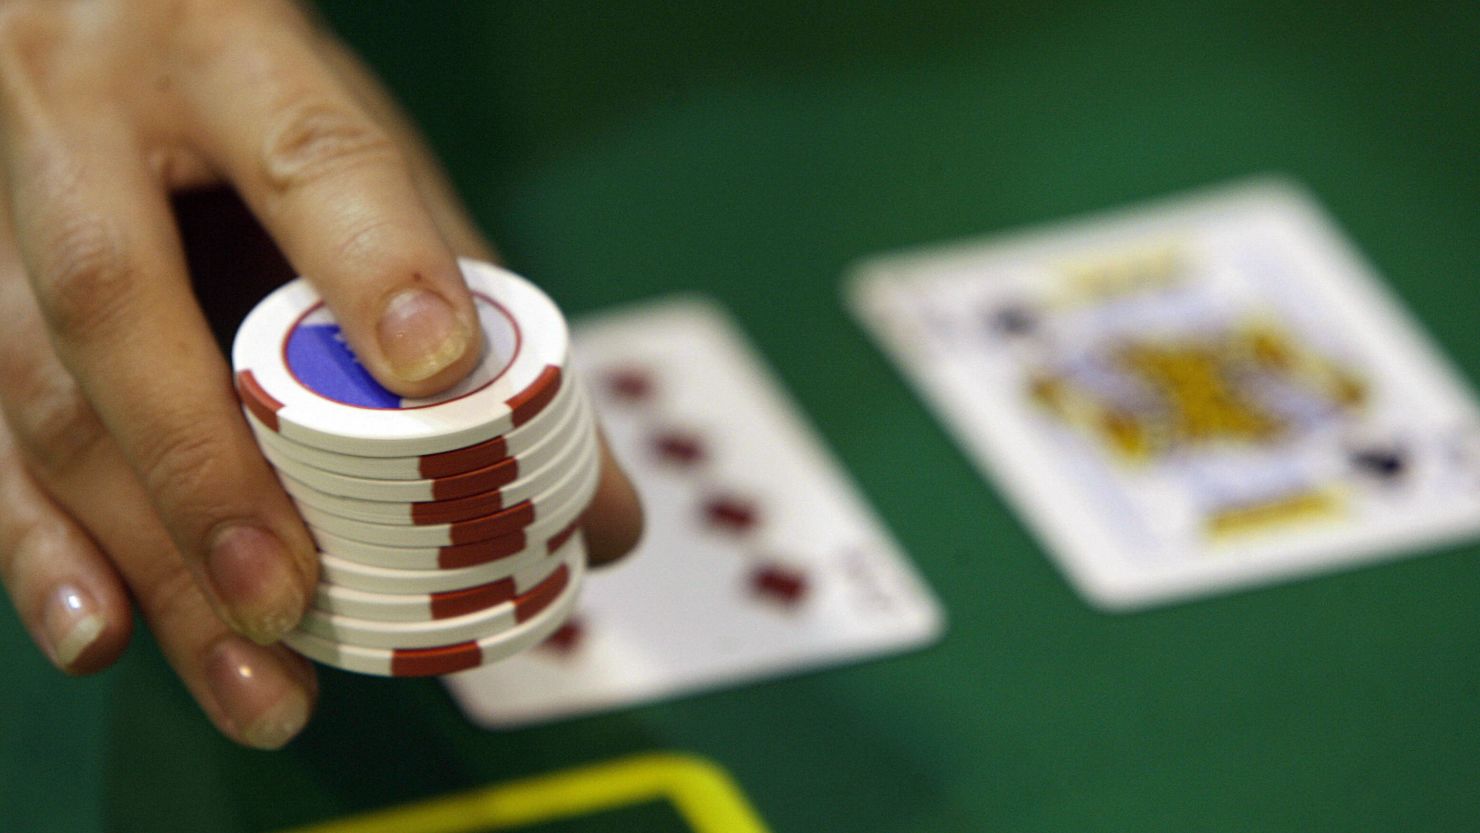 Cyprus may license casinos to help reduce debt.